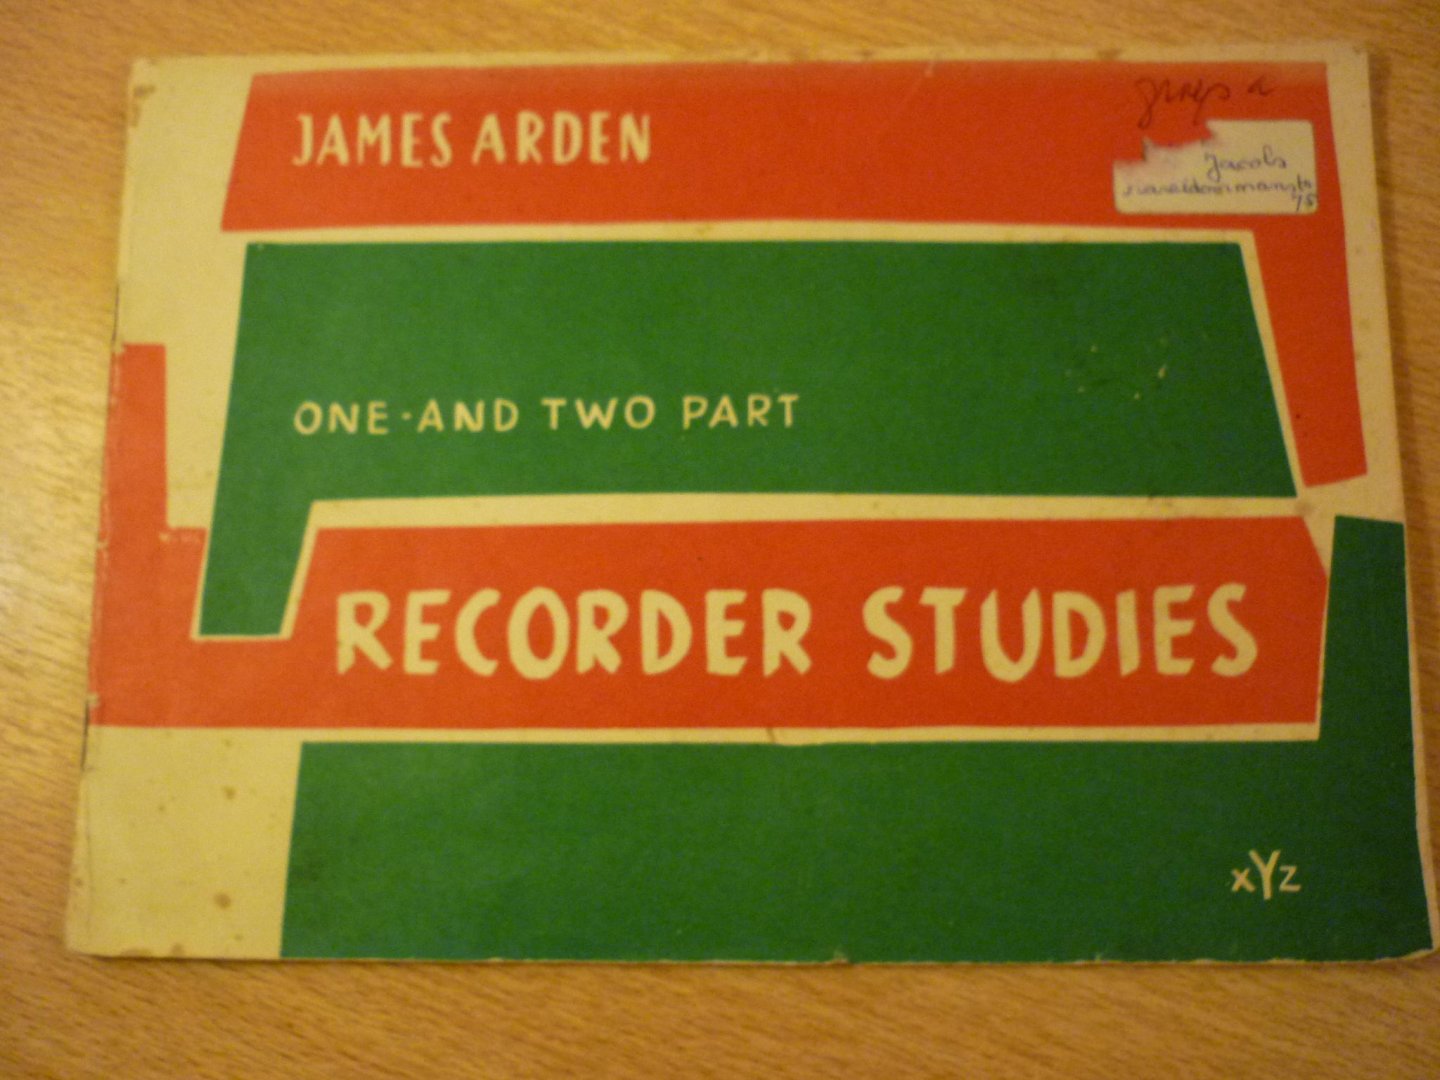 Arden; James - Recorder Studies; One- and two part